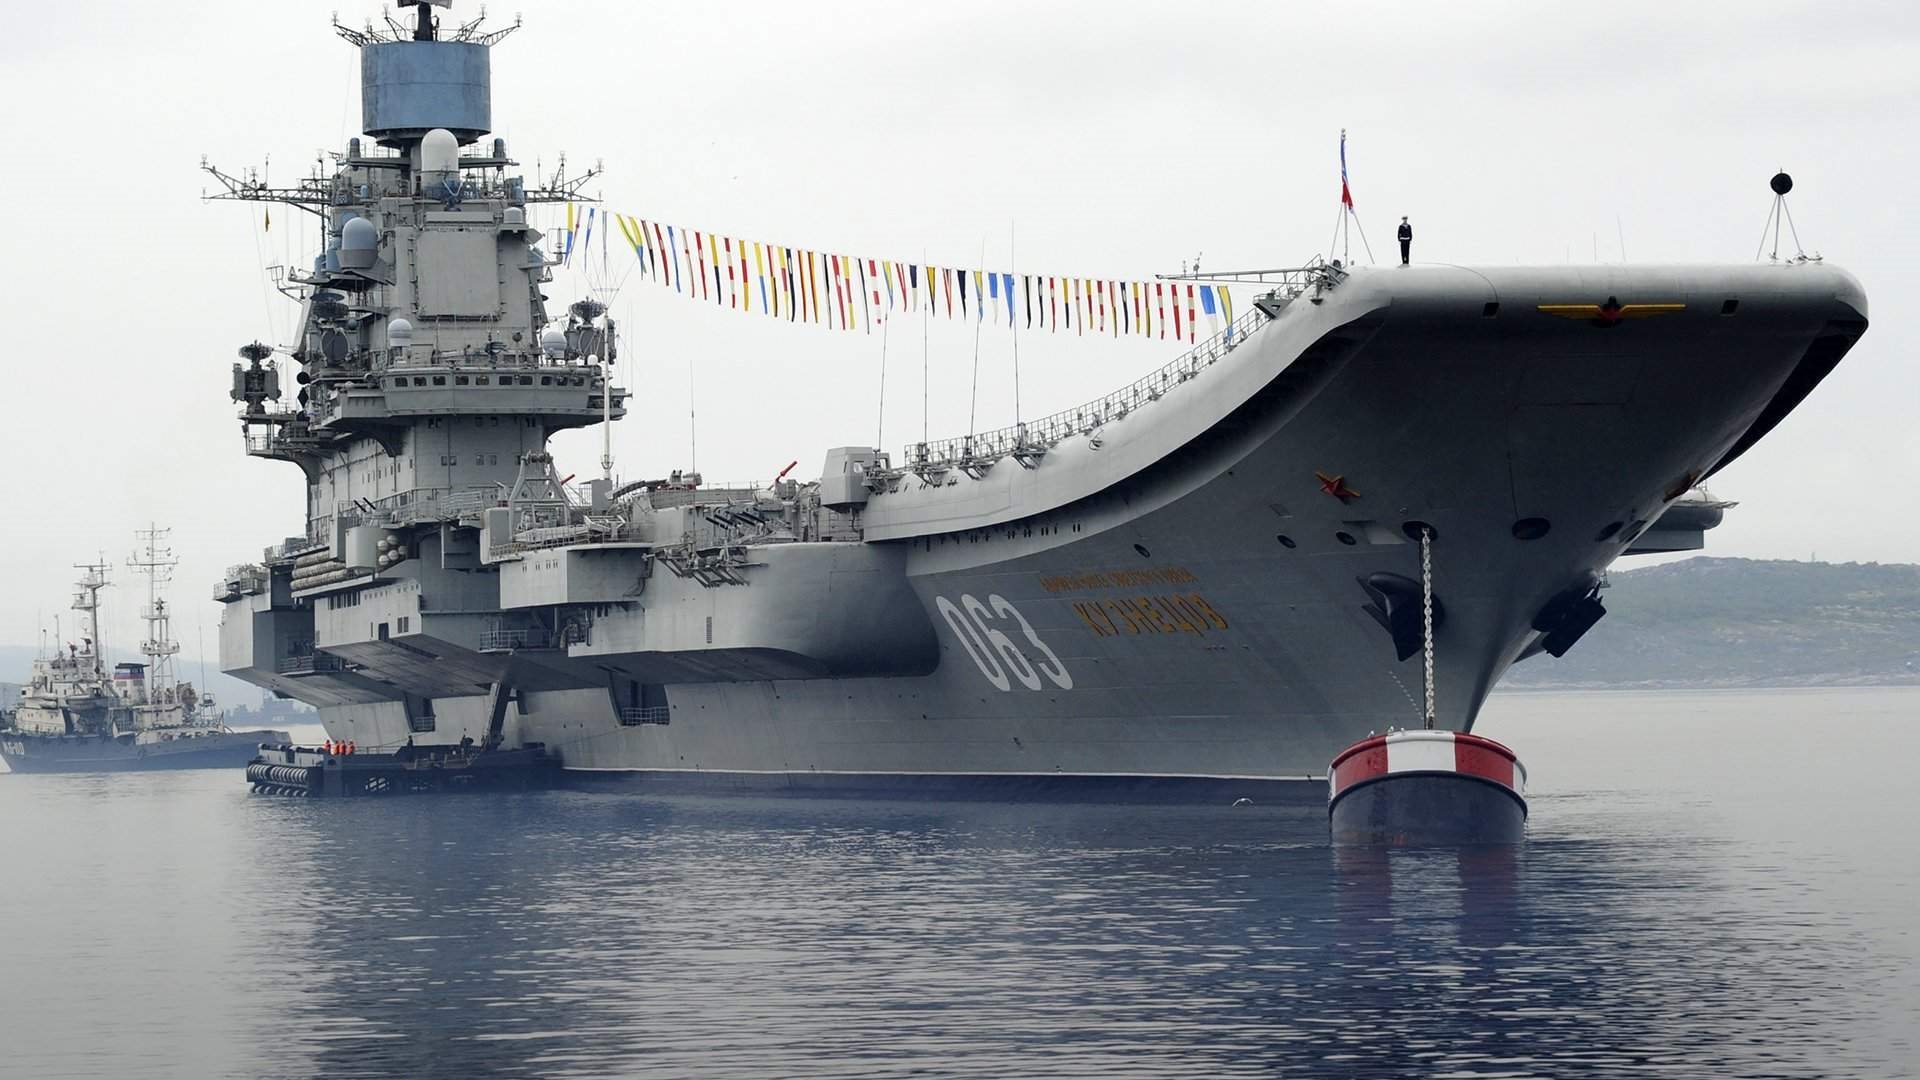 Admiral Kuznetsov, Russia's last aircraft carrier. Image Credit: Creative Commons.